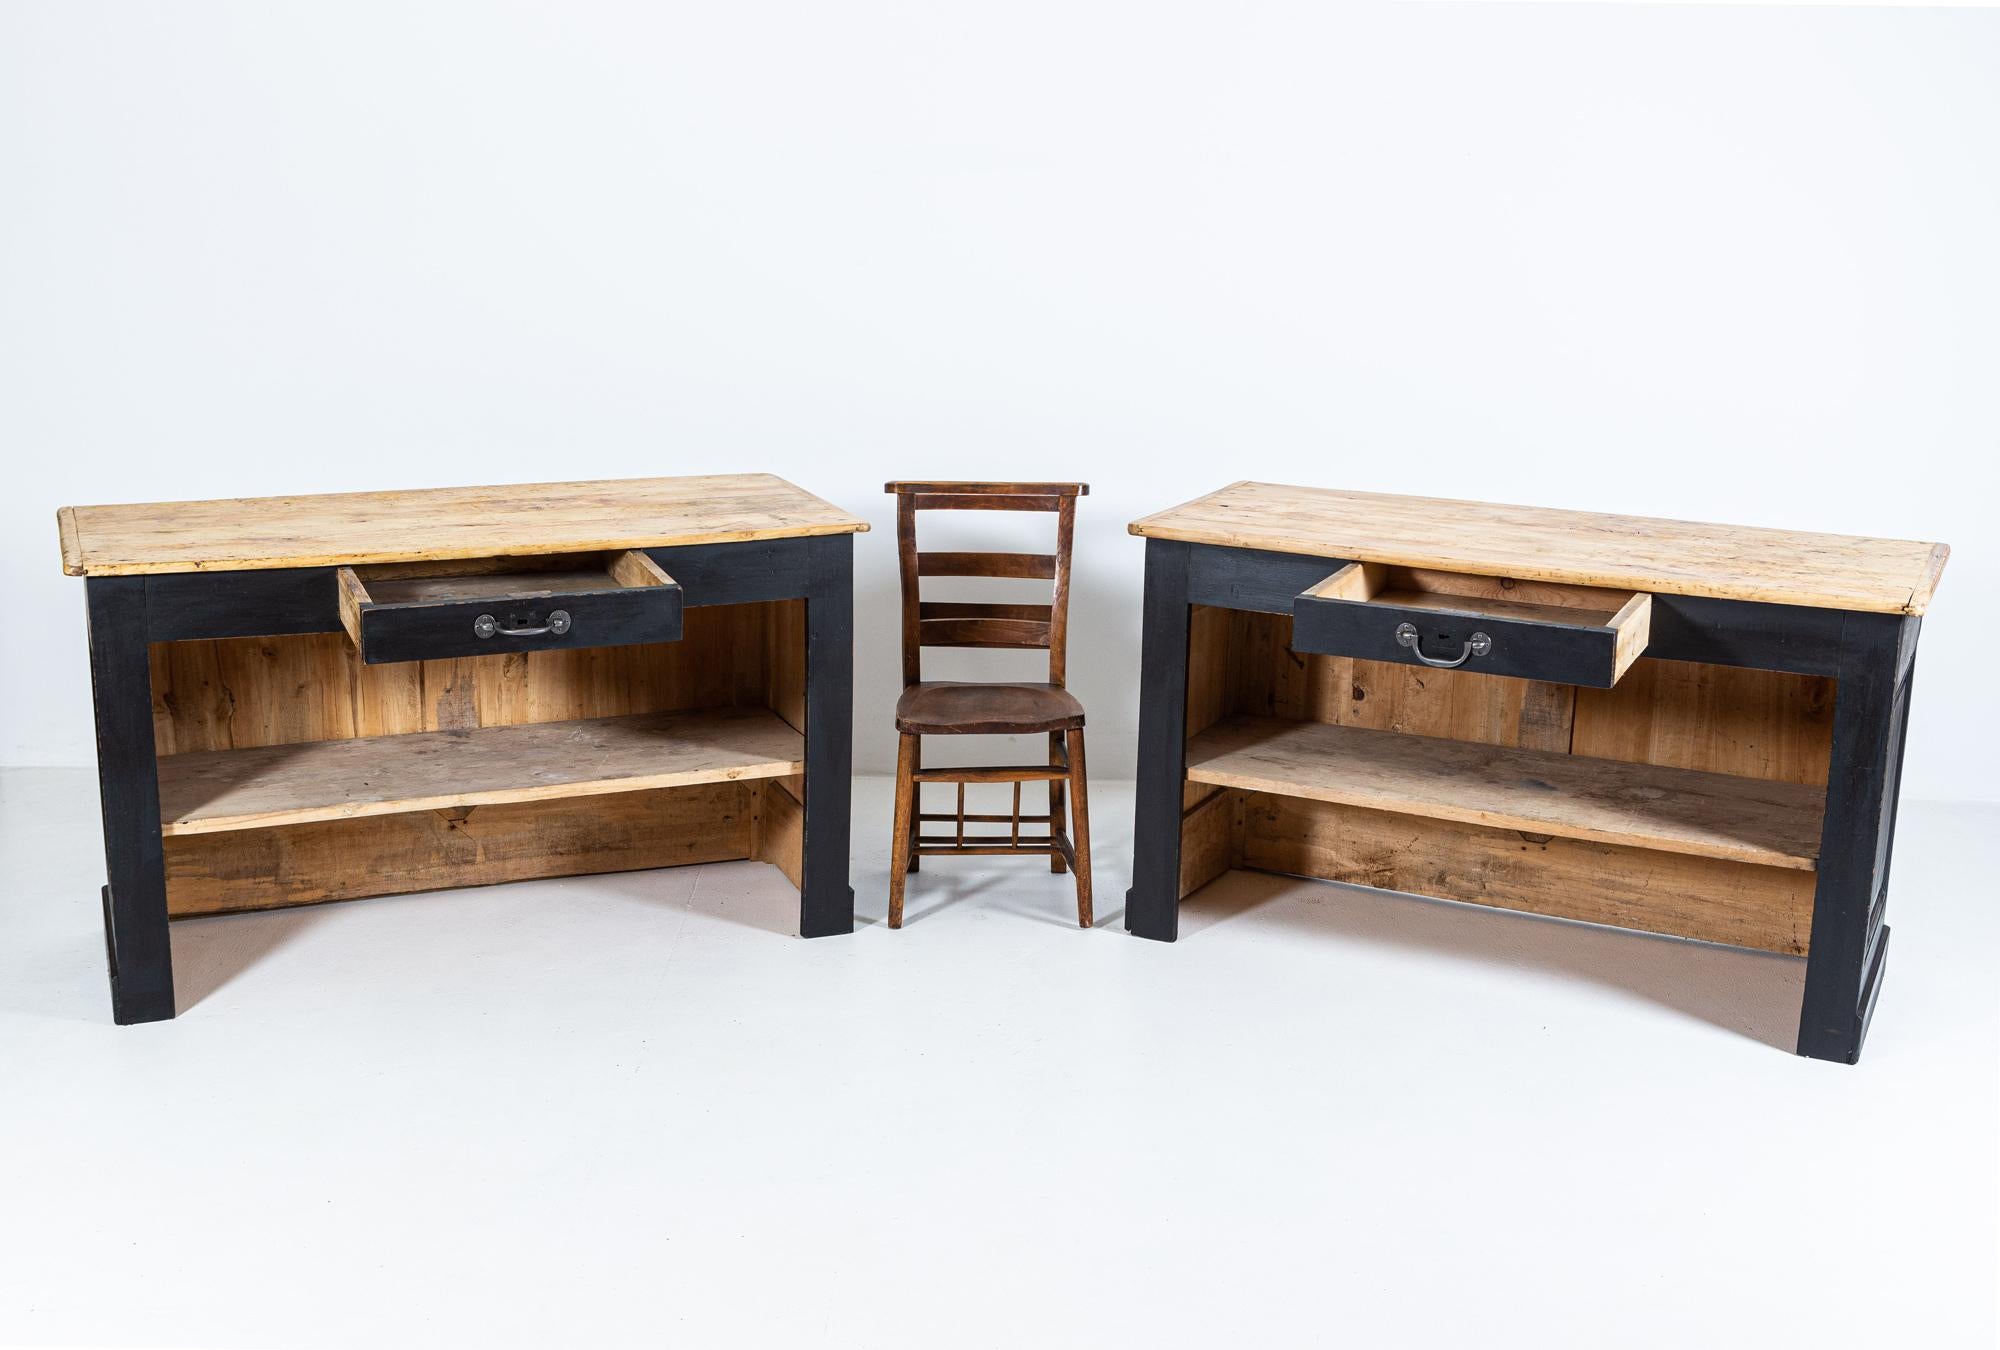 Circa 1860

Pair of matching ebonised fruitwood Parisian Boulangerie counters, matching with a single drawer and shelves. Breadboard ends to the tops.
Would make an excellent Kitchen Island.

Sourced from Paris

Price is each

Measures: W